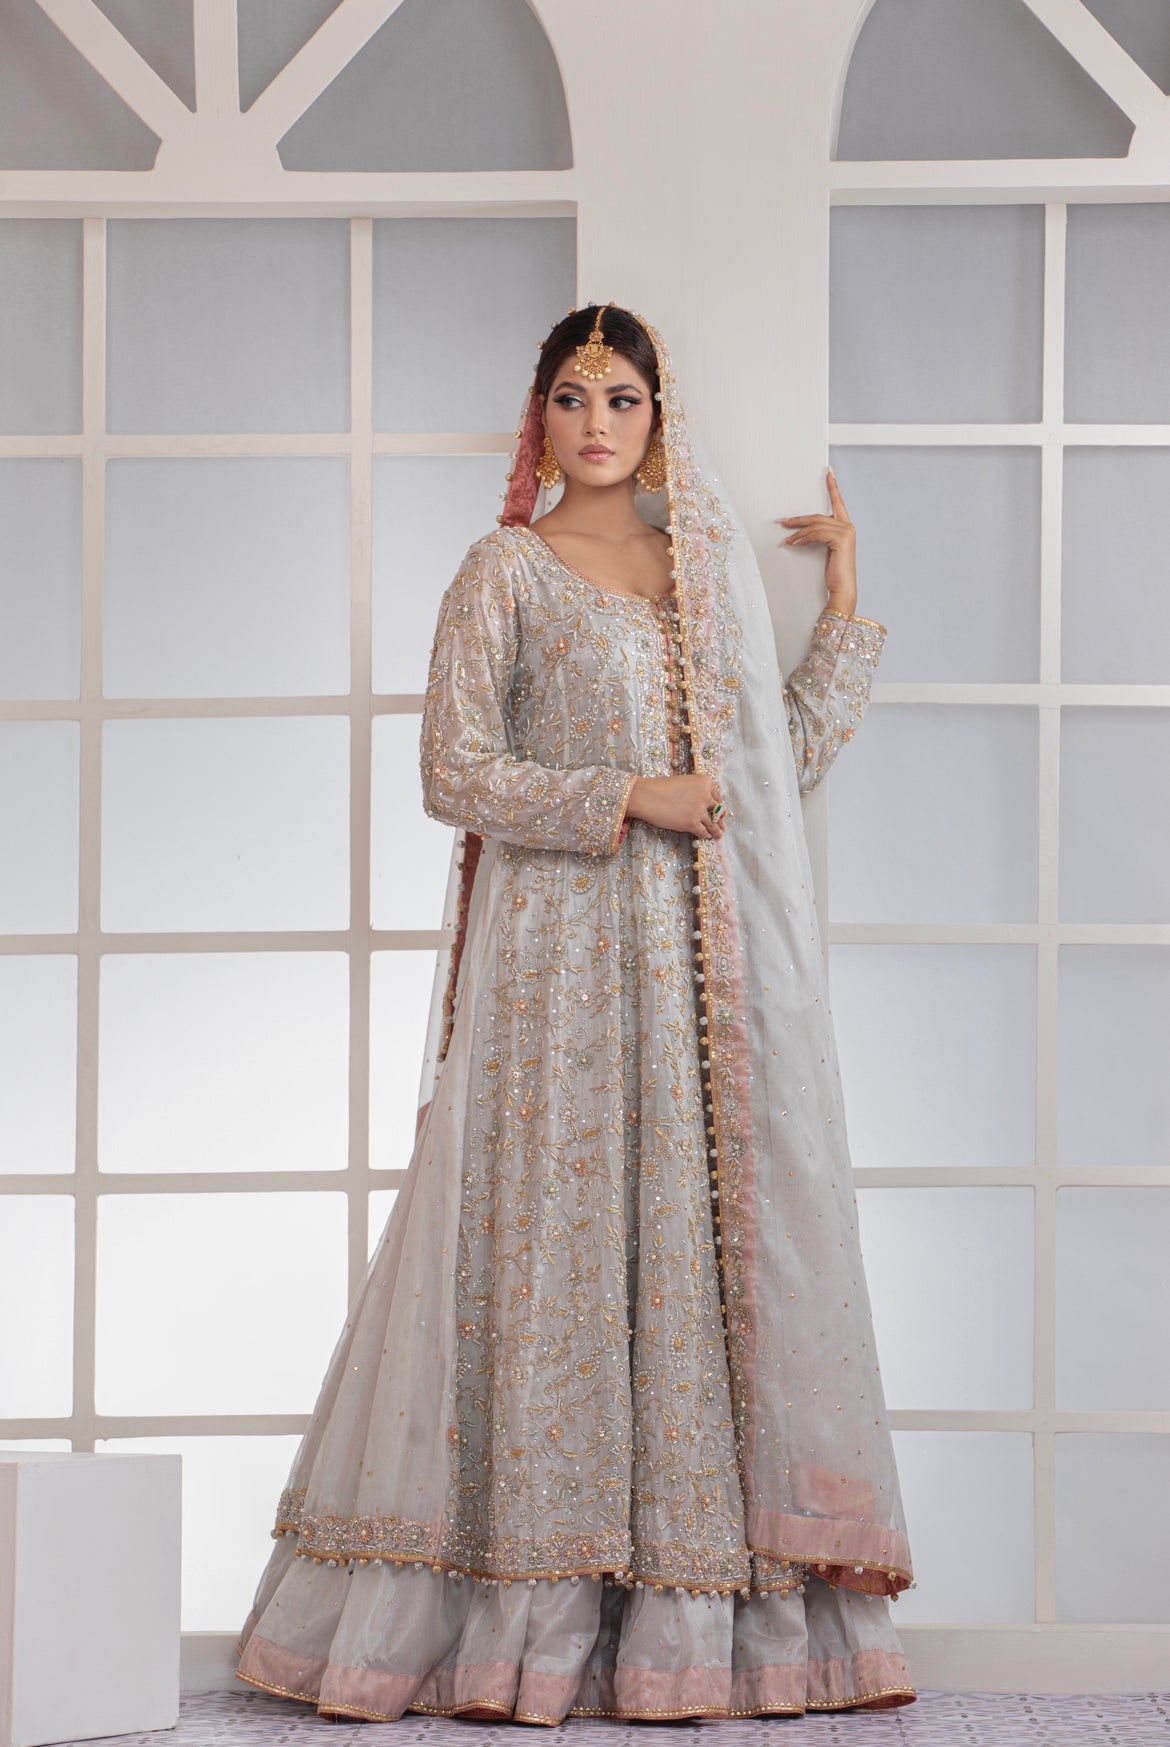 6 color Net Pakistani Wedding Gown at Rs 1499 in Surat | ID: 23753415088